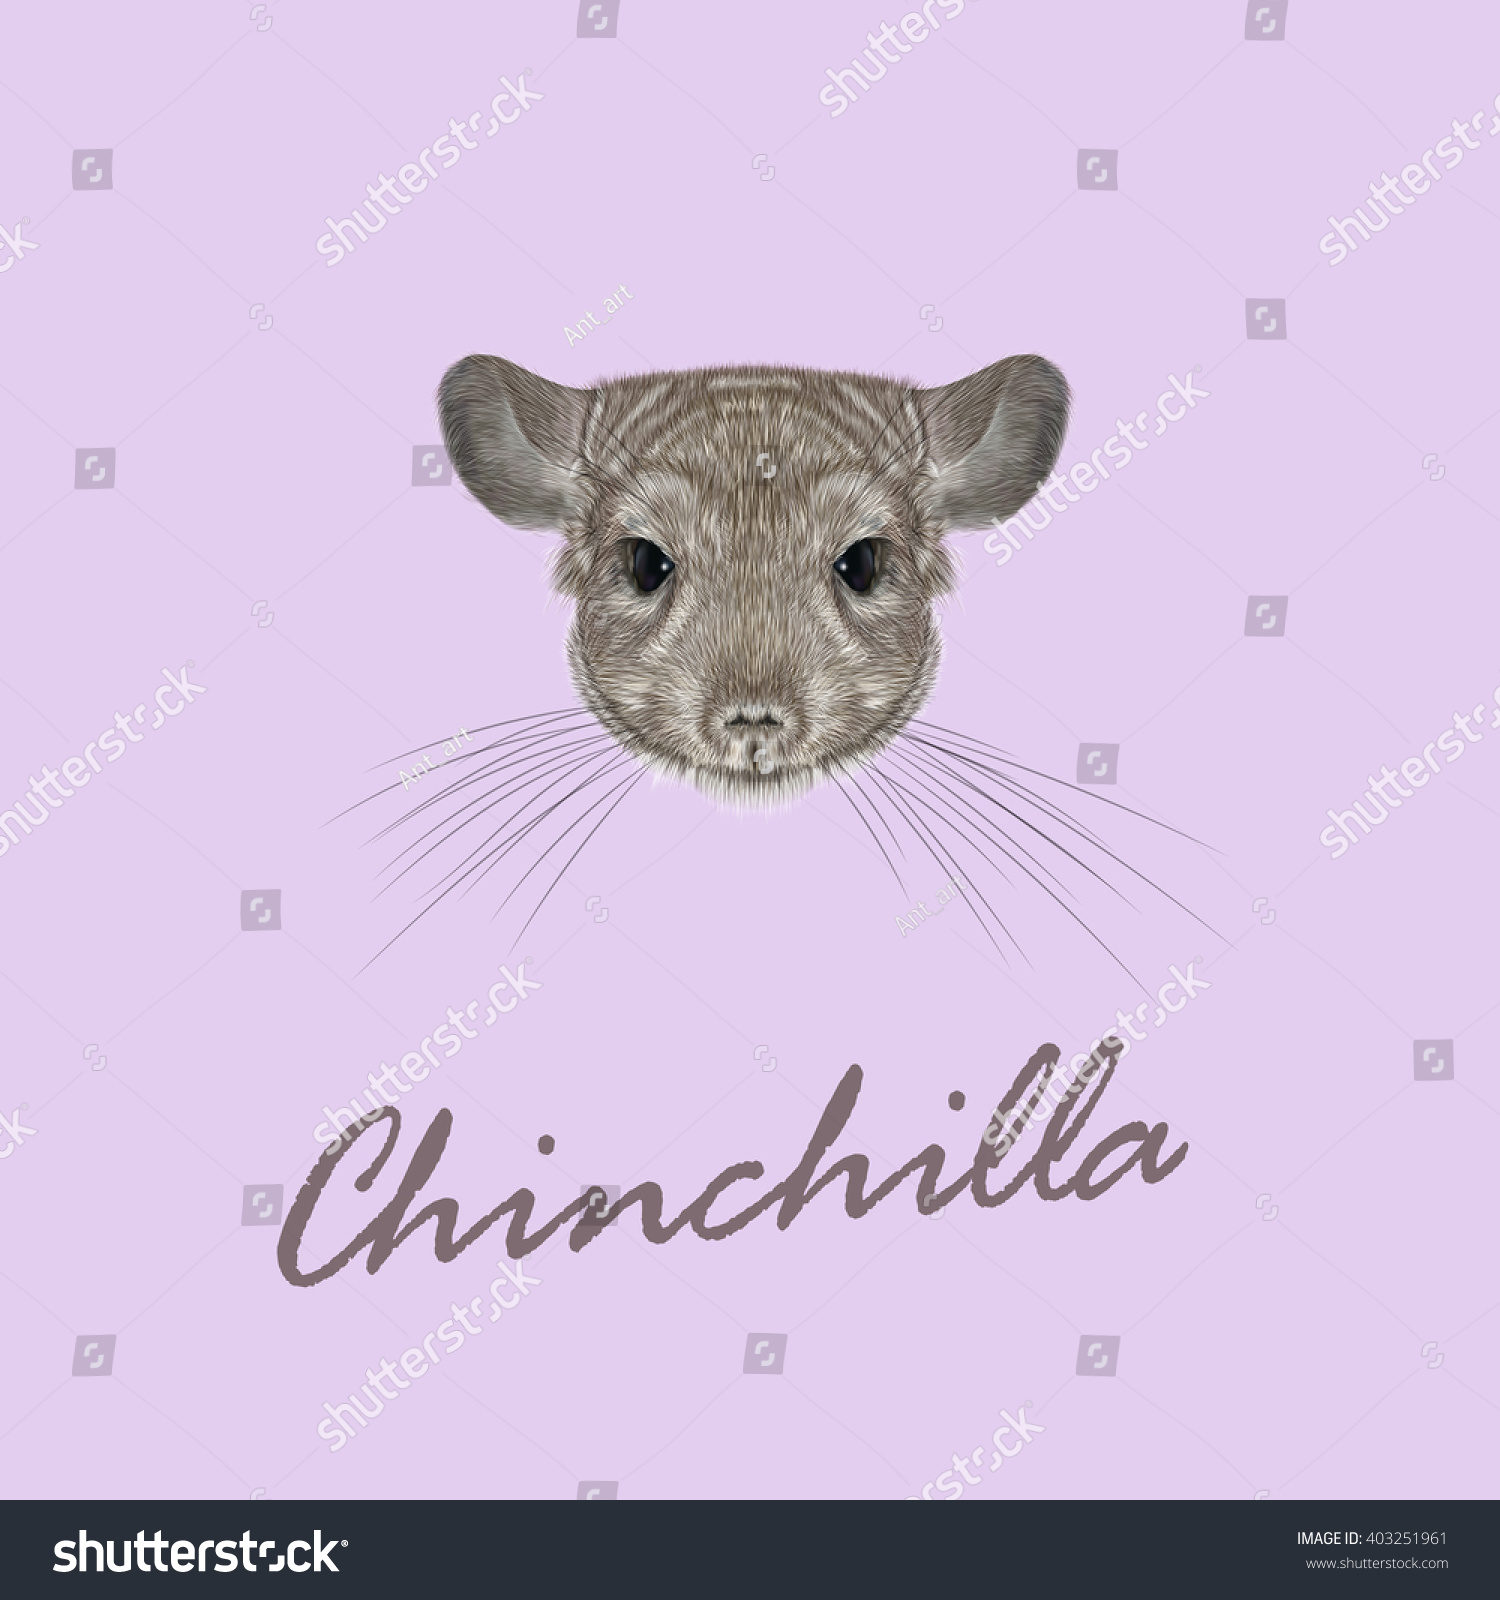 SVG of Vector Illustrated portrait of Chinchilla.Cute fluffy face of Chinchilla on pink background. svg